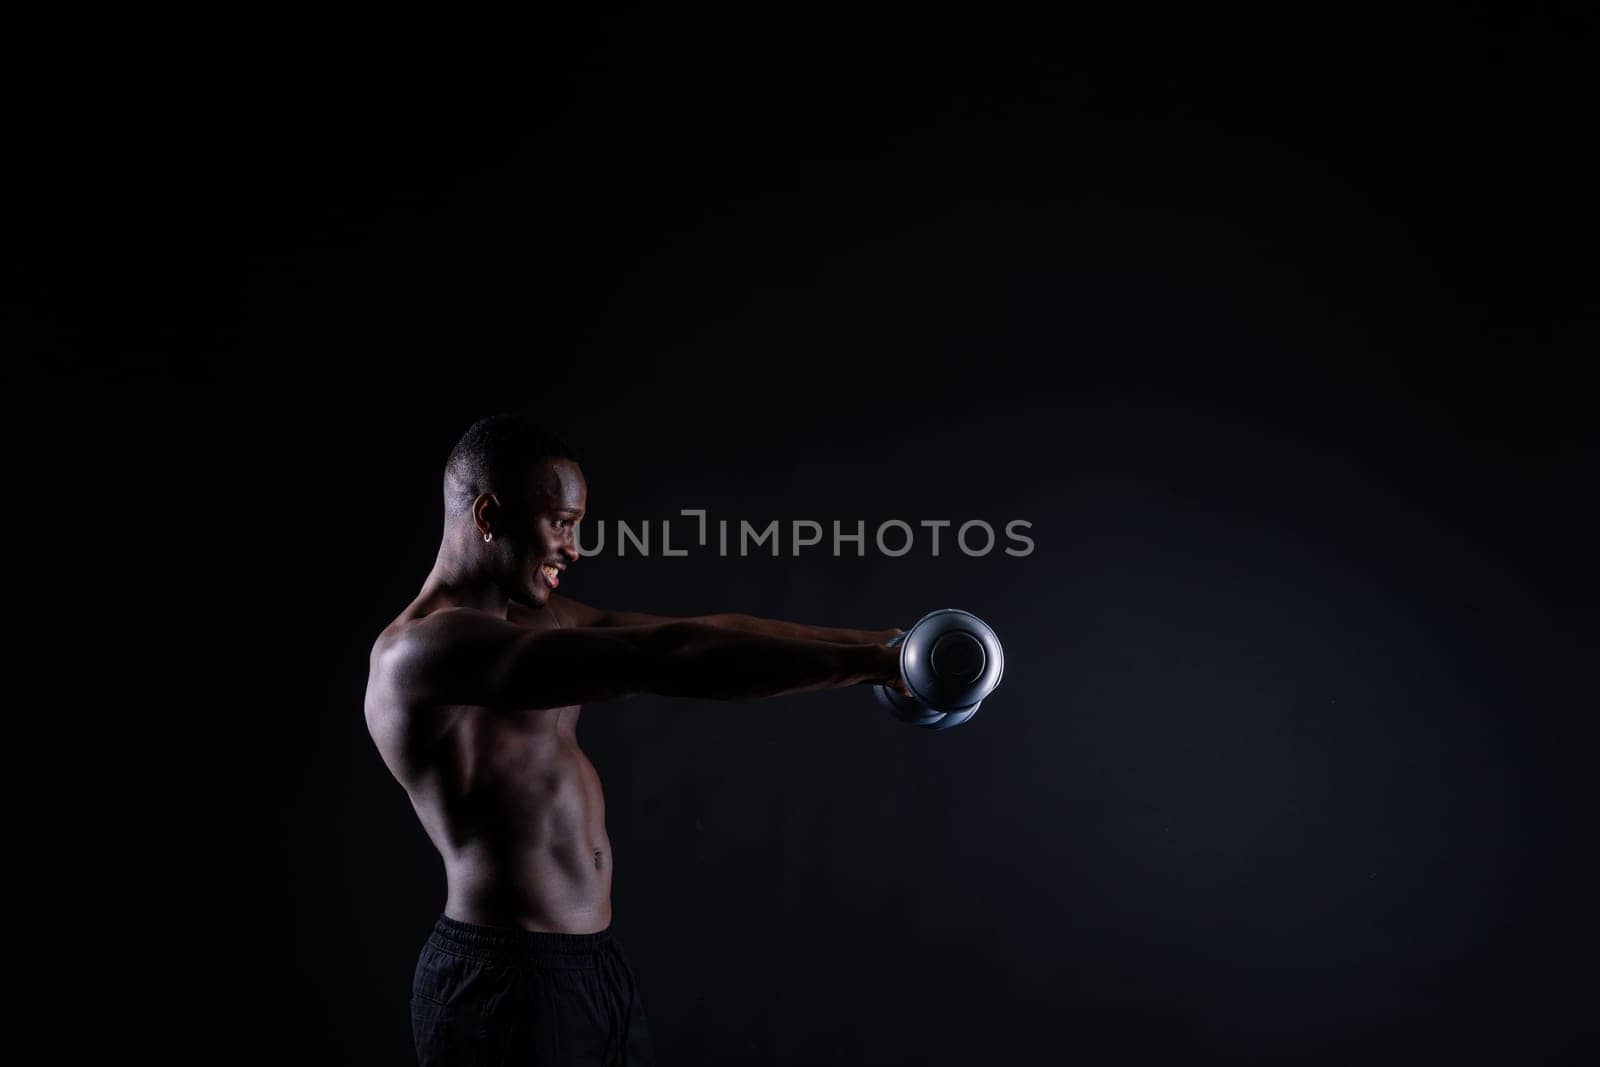 One young african muscular build man standing topless silhouette isolated on black background by Zelenin